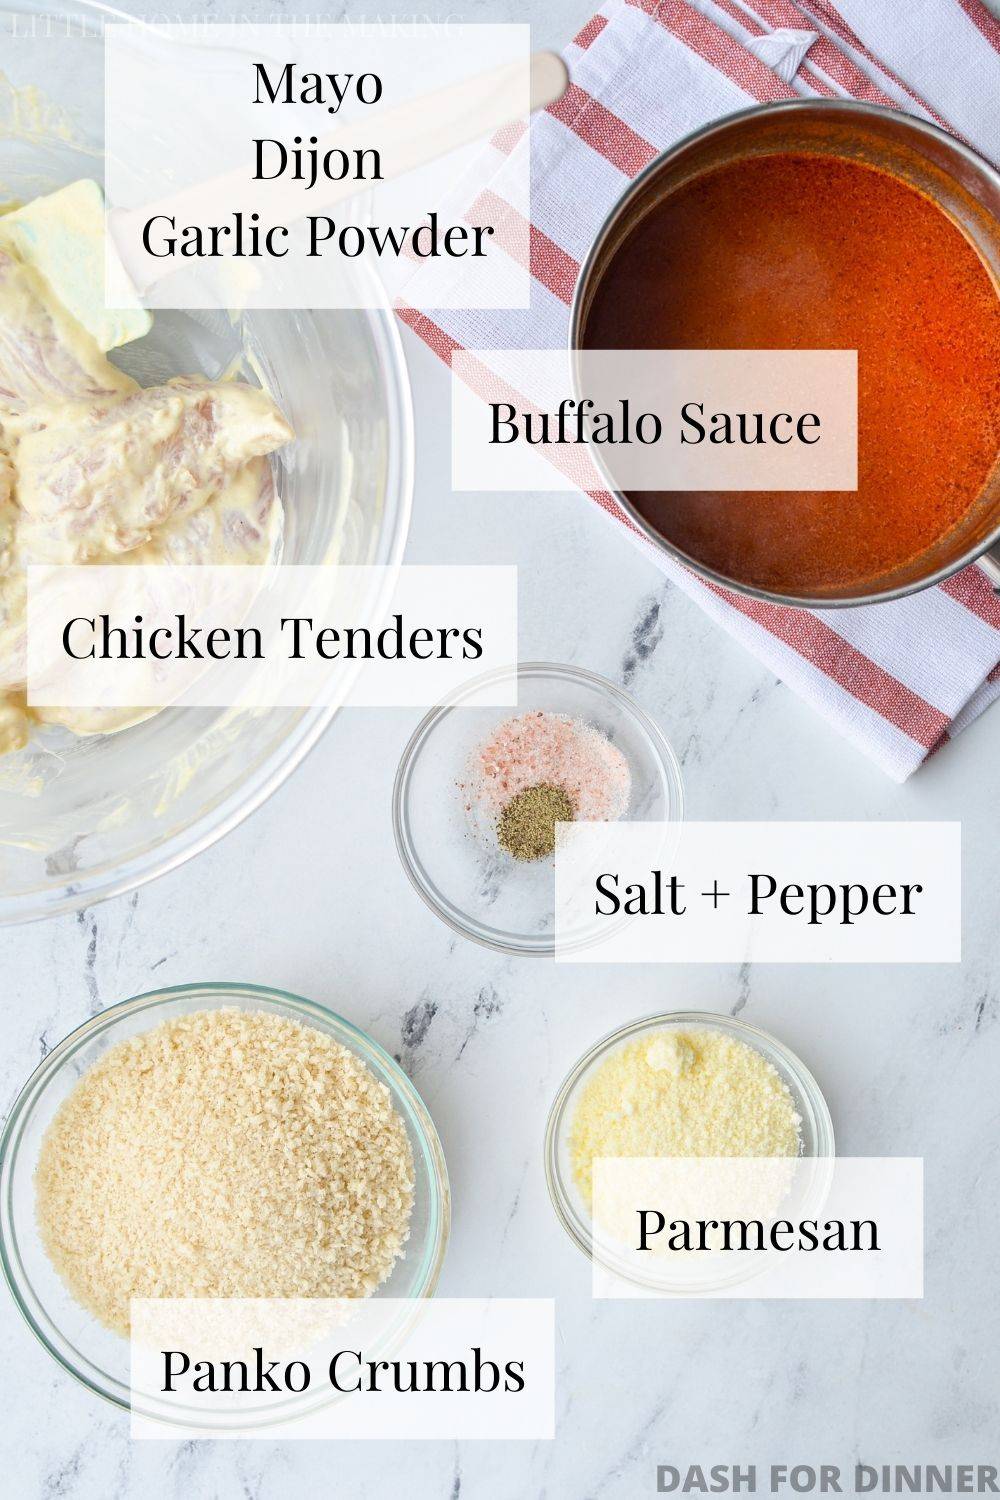 The ingredients needed to make air fryer buffalo chicken tenders.